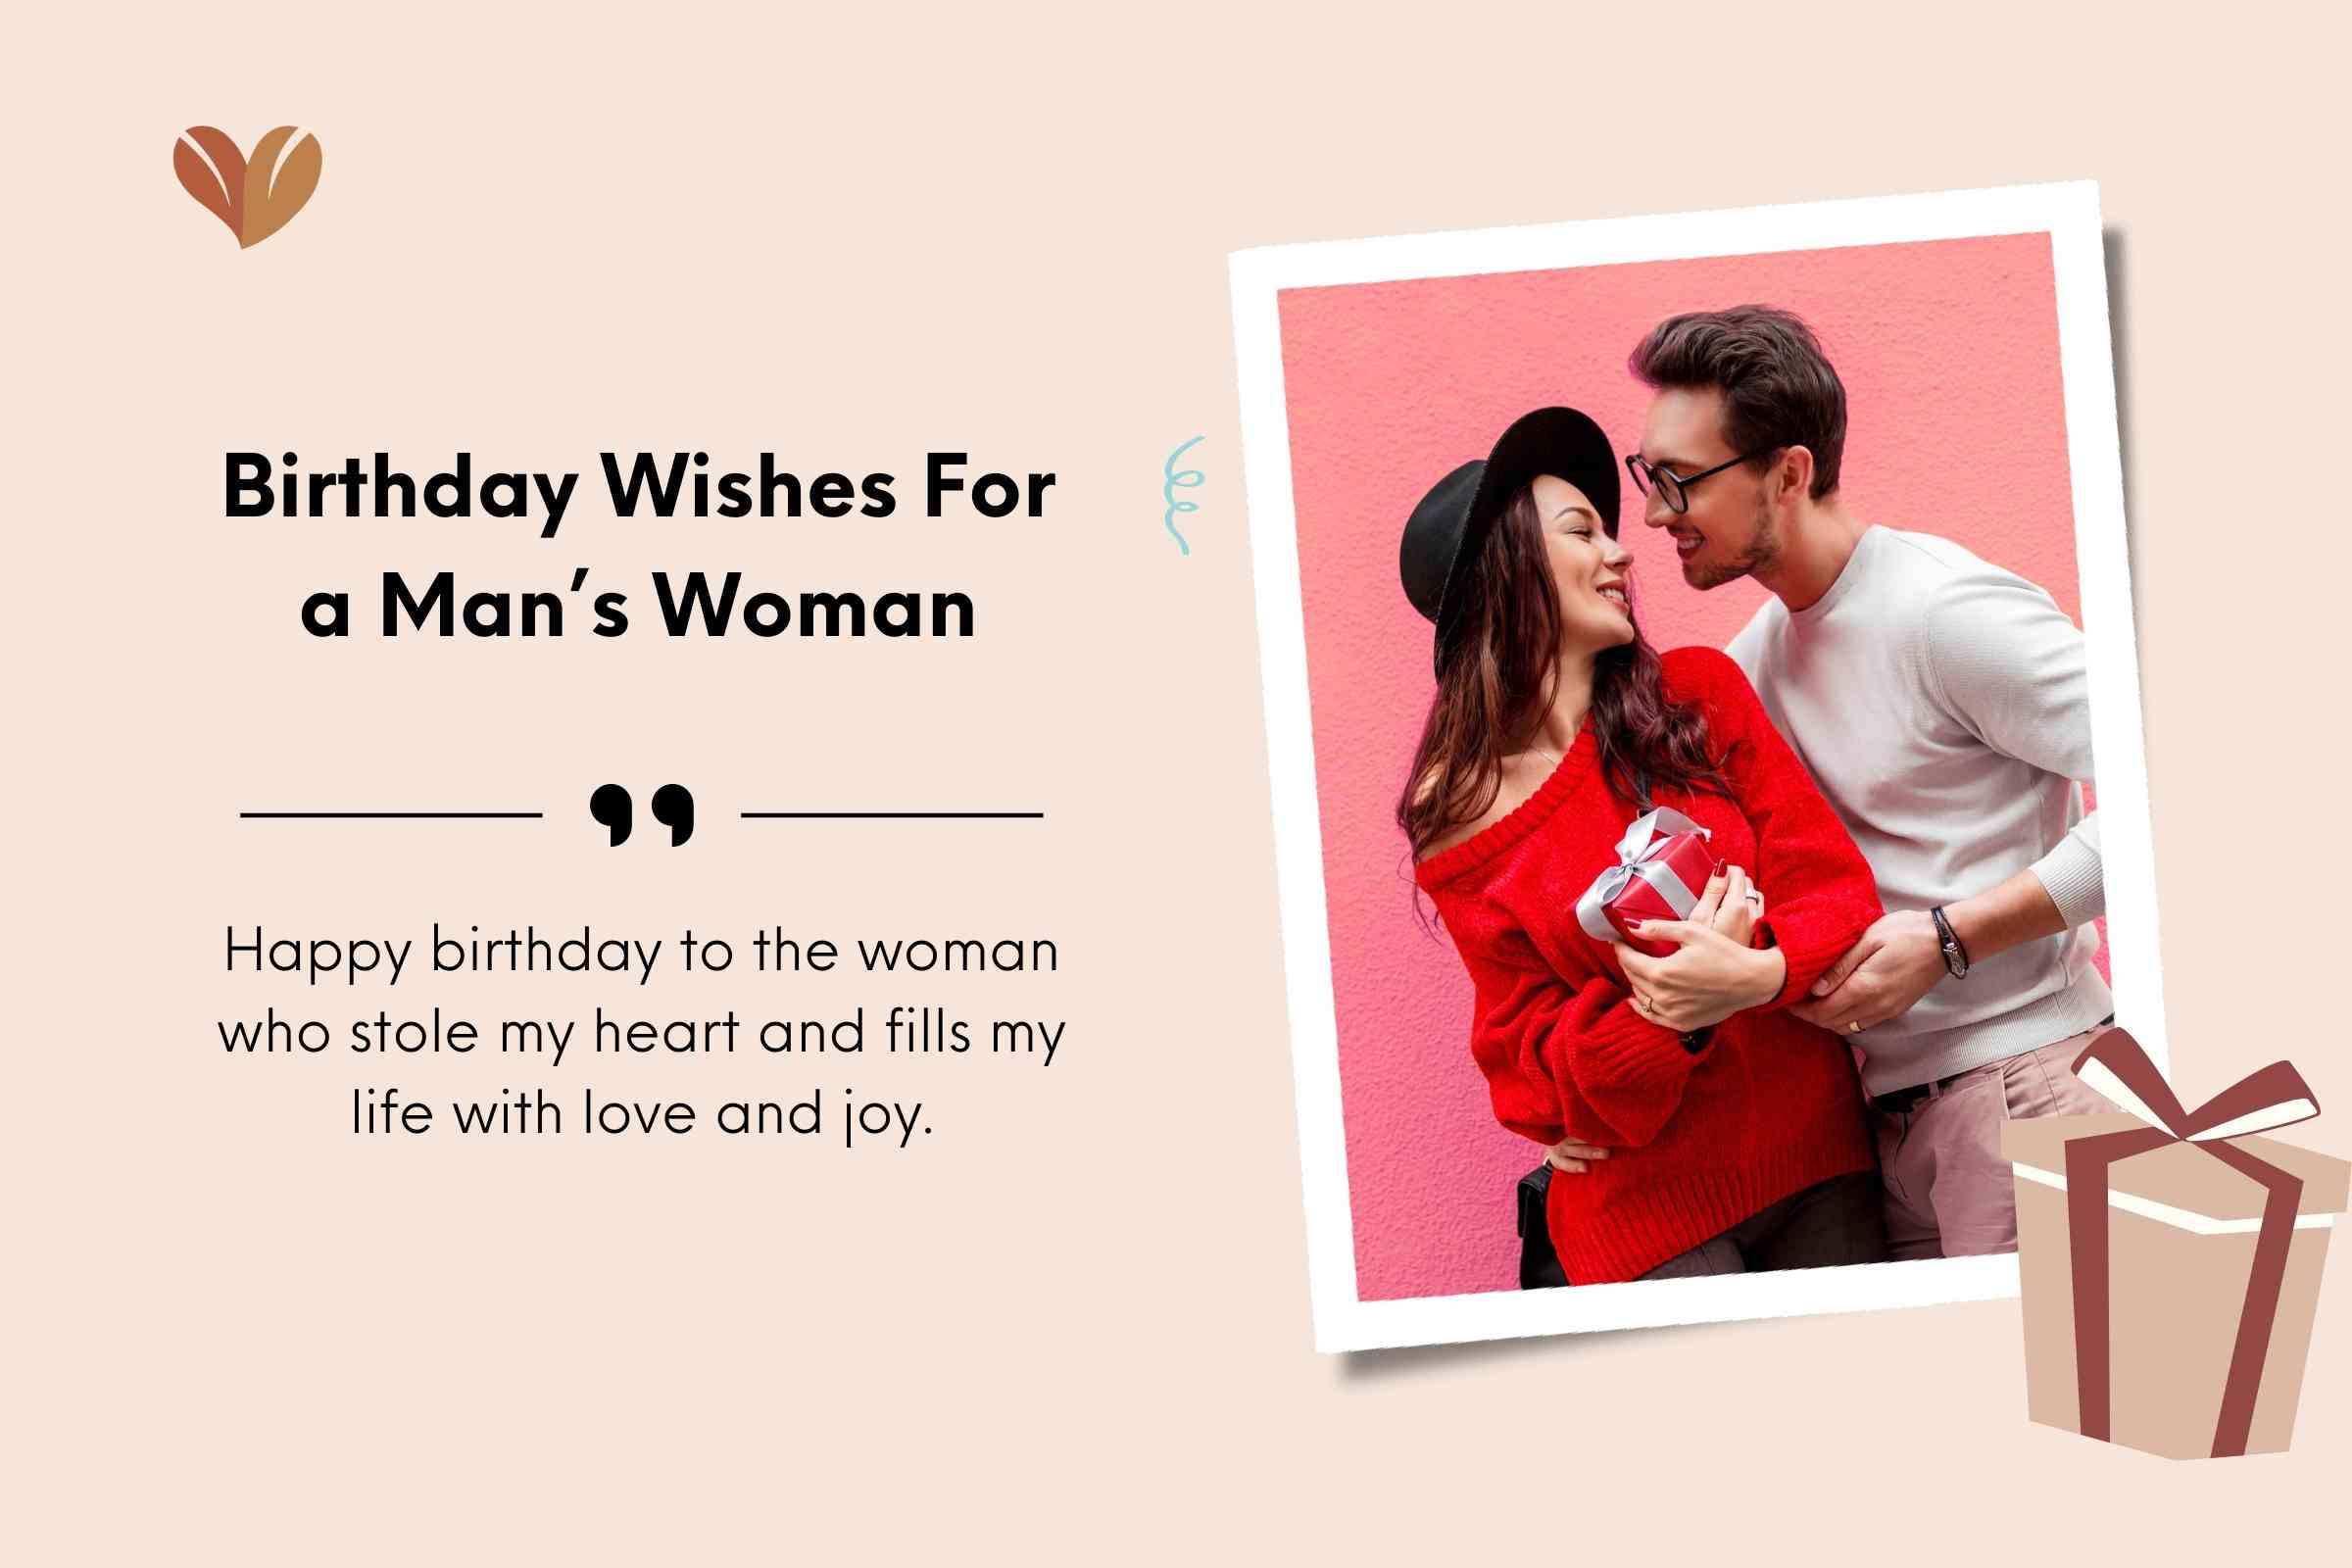 Birthday Wishes For a Man’s Woman